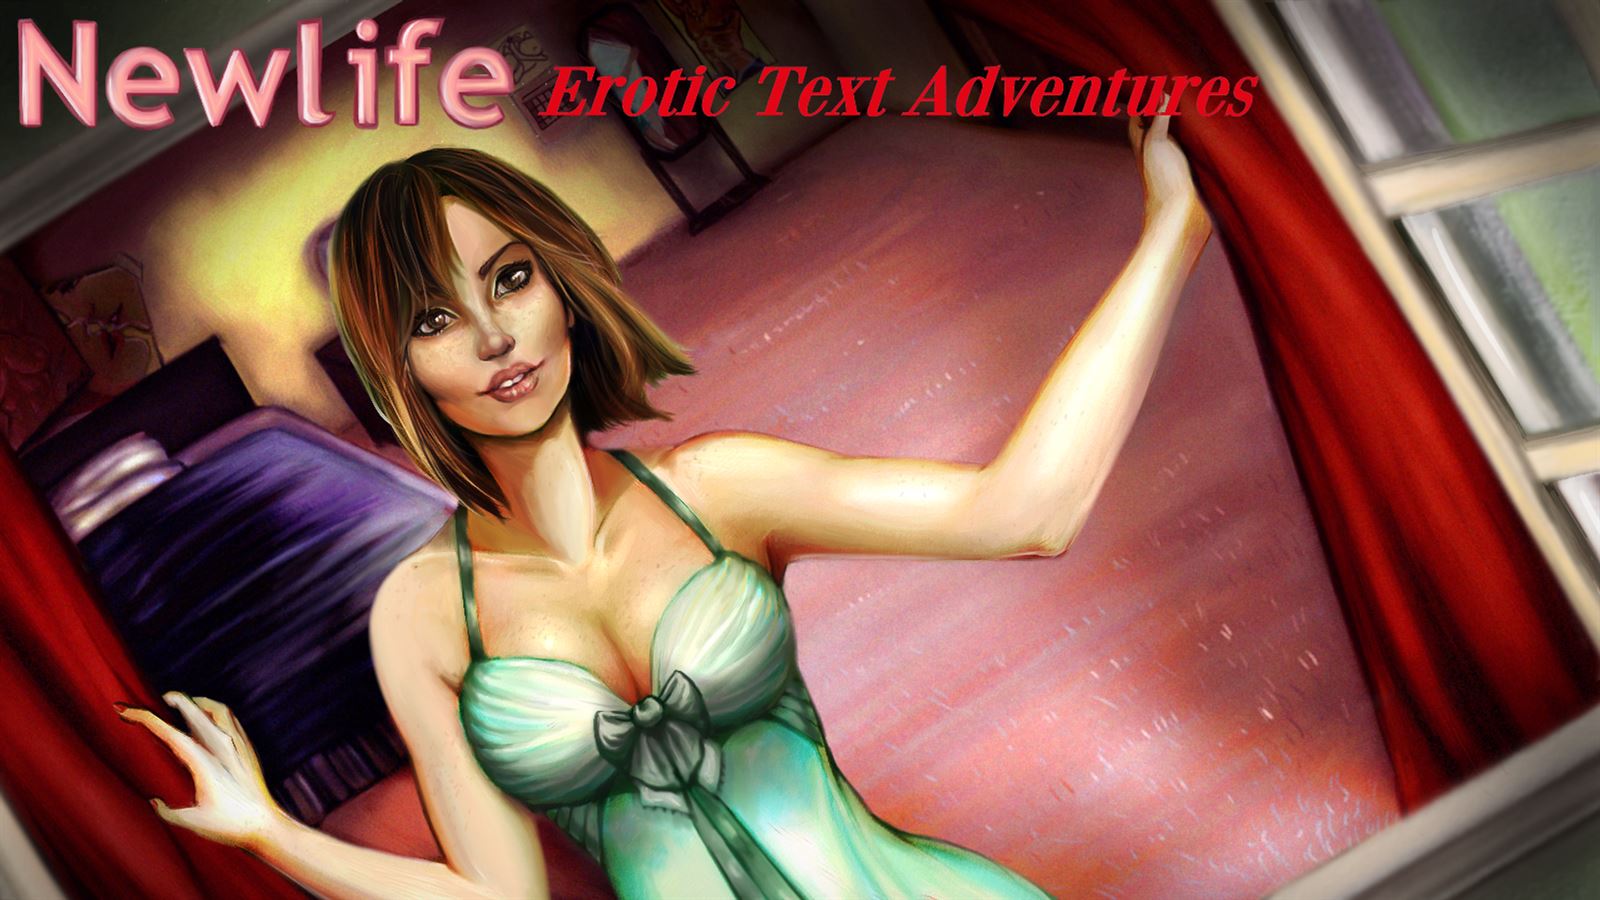 Newlife porn xxx game download cover